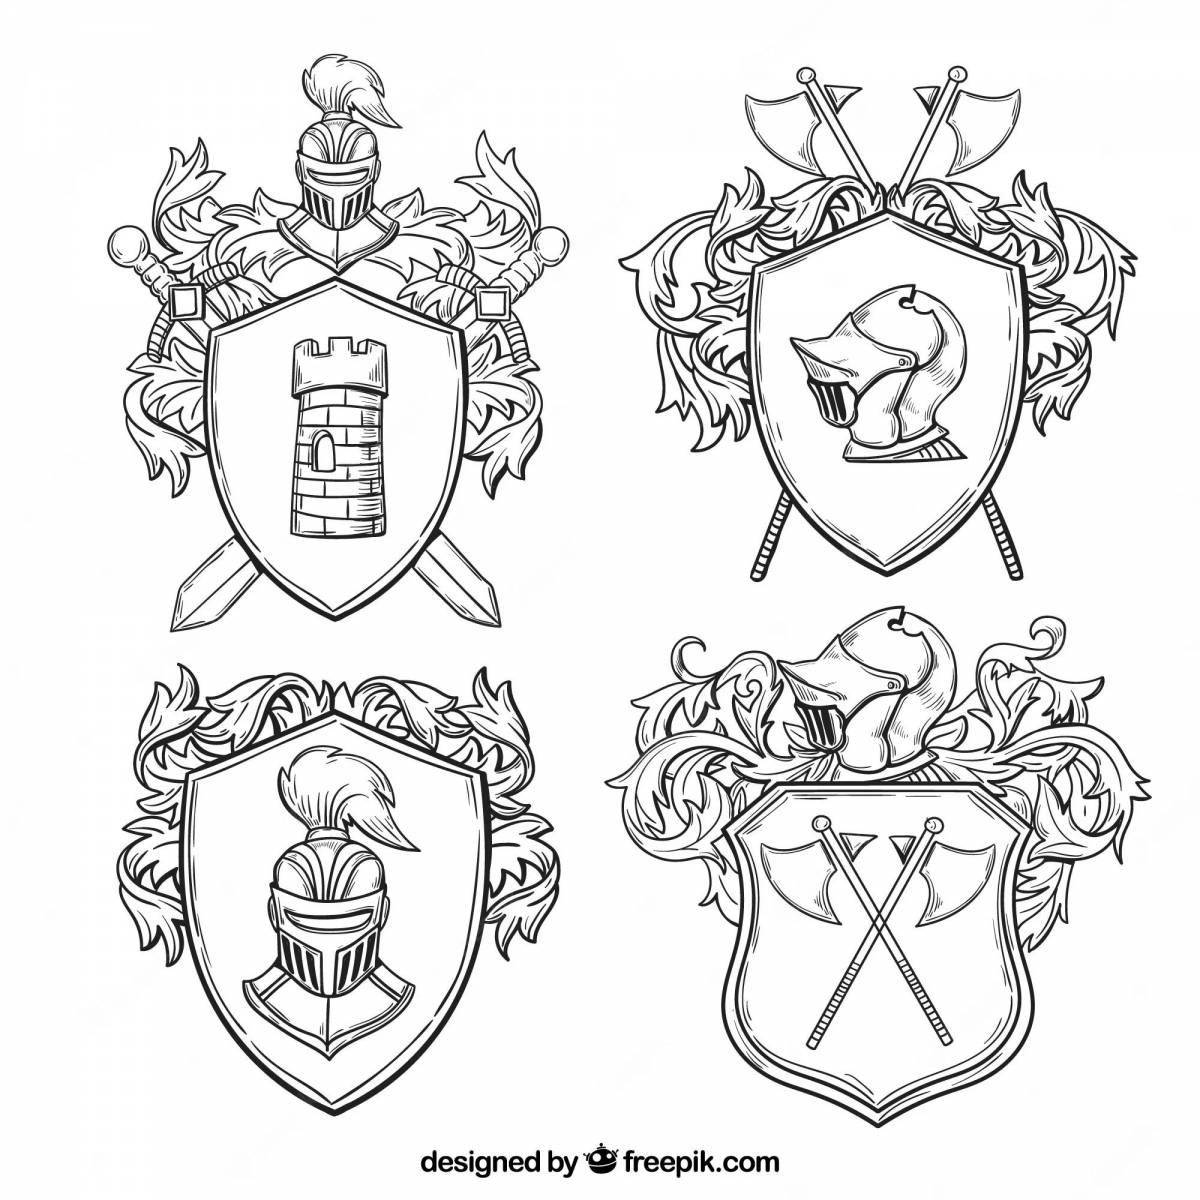 Amazing coloring of the knight's coat of arms